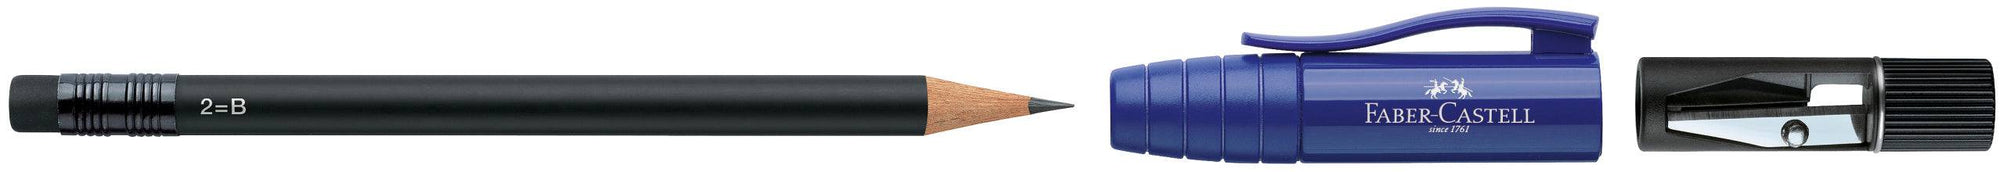 Faber-castell Perfect Pencil  II with built-in sharpening box - Blesket Canada